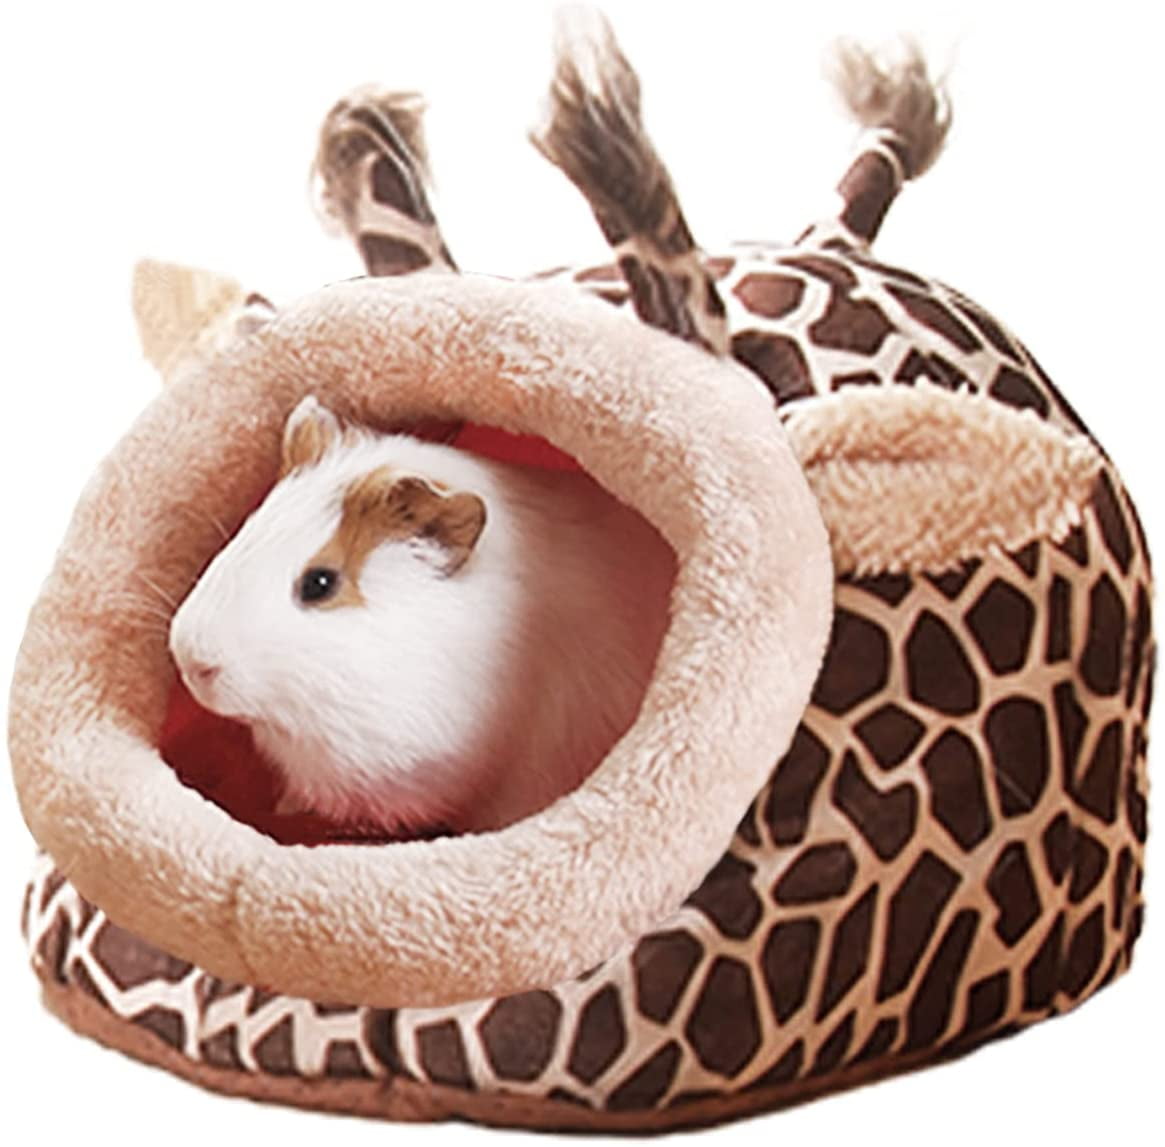 Handmade Sleeping Bag Pouch Hideout Cave Habitat for Hedgehog Guinea Pig Hamster Ferret Squirrel Small Animal Bed Nest House Cage Portable Big Cushion Blue 